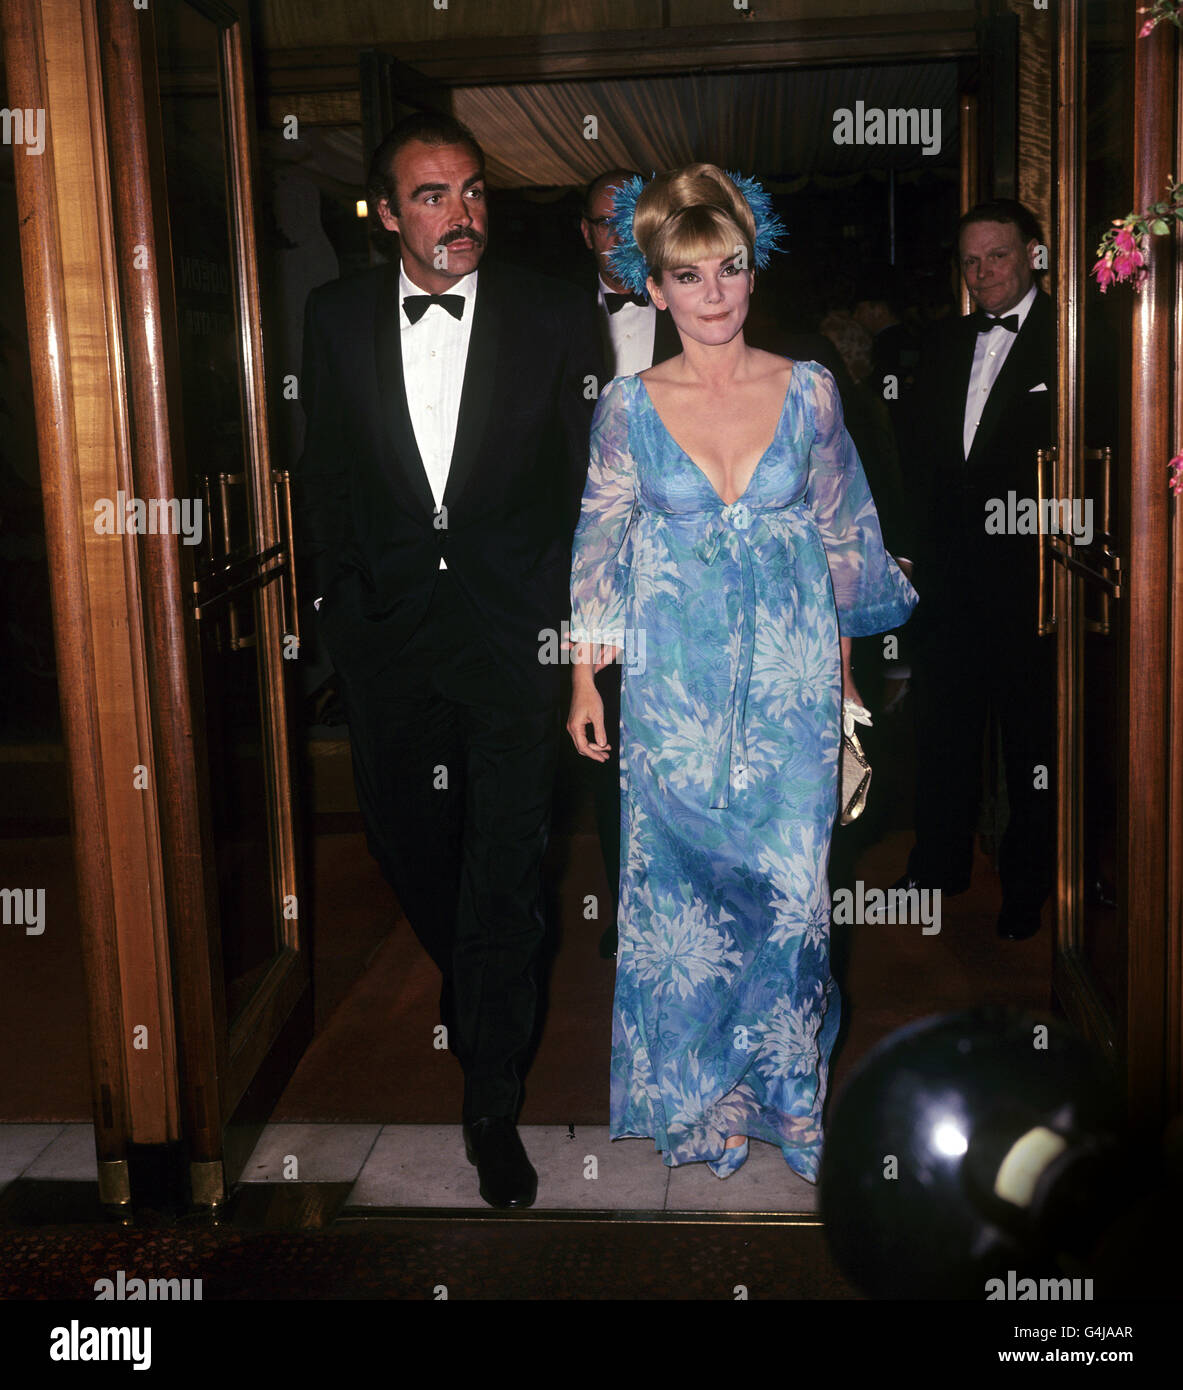 Sean Connery, who plays James Bond in 'You Only Live Twice' arriving with his wife, actress Diane Cilento, for the premiere of the film at the Odeon, Leicester Square. Stock Photo